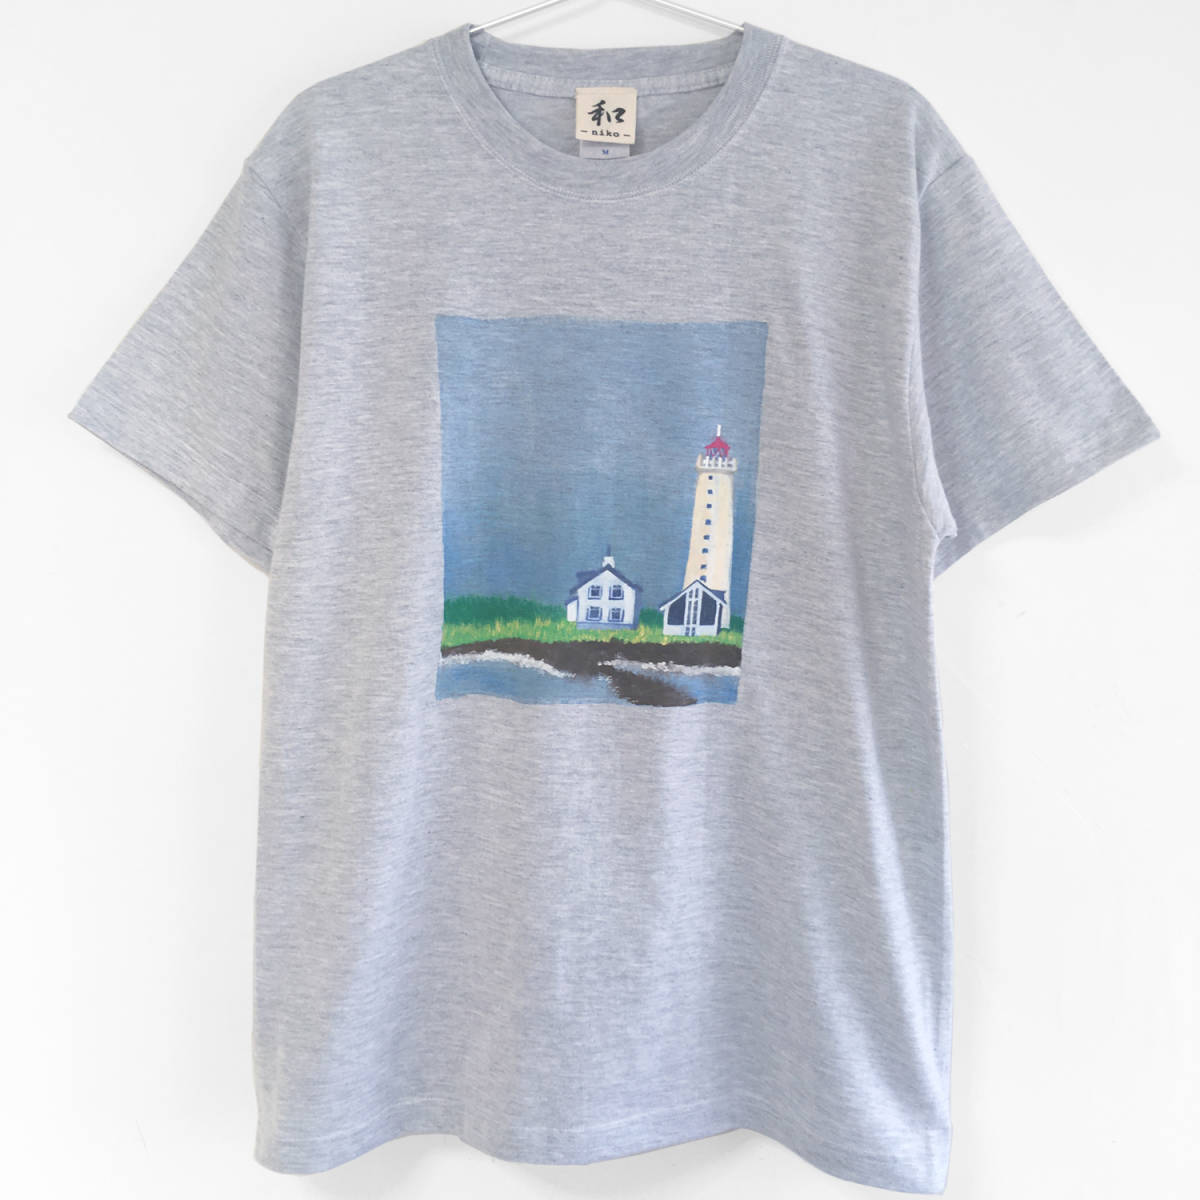 Men's T-shirt, size L, lighthouse pattern, hand-drawn T-shirt, casual, house, picture book, Nordic, Christmas, Large size, Crew neck, Patterned